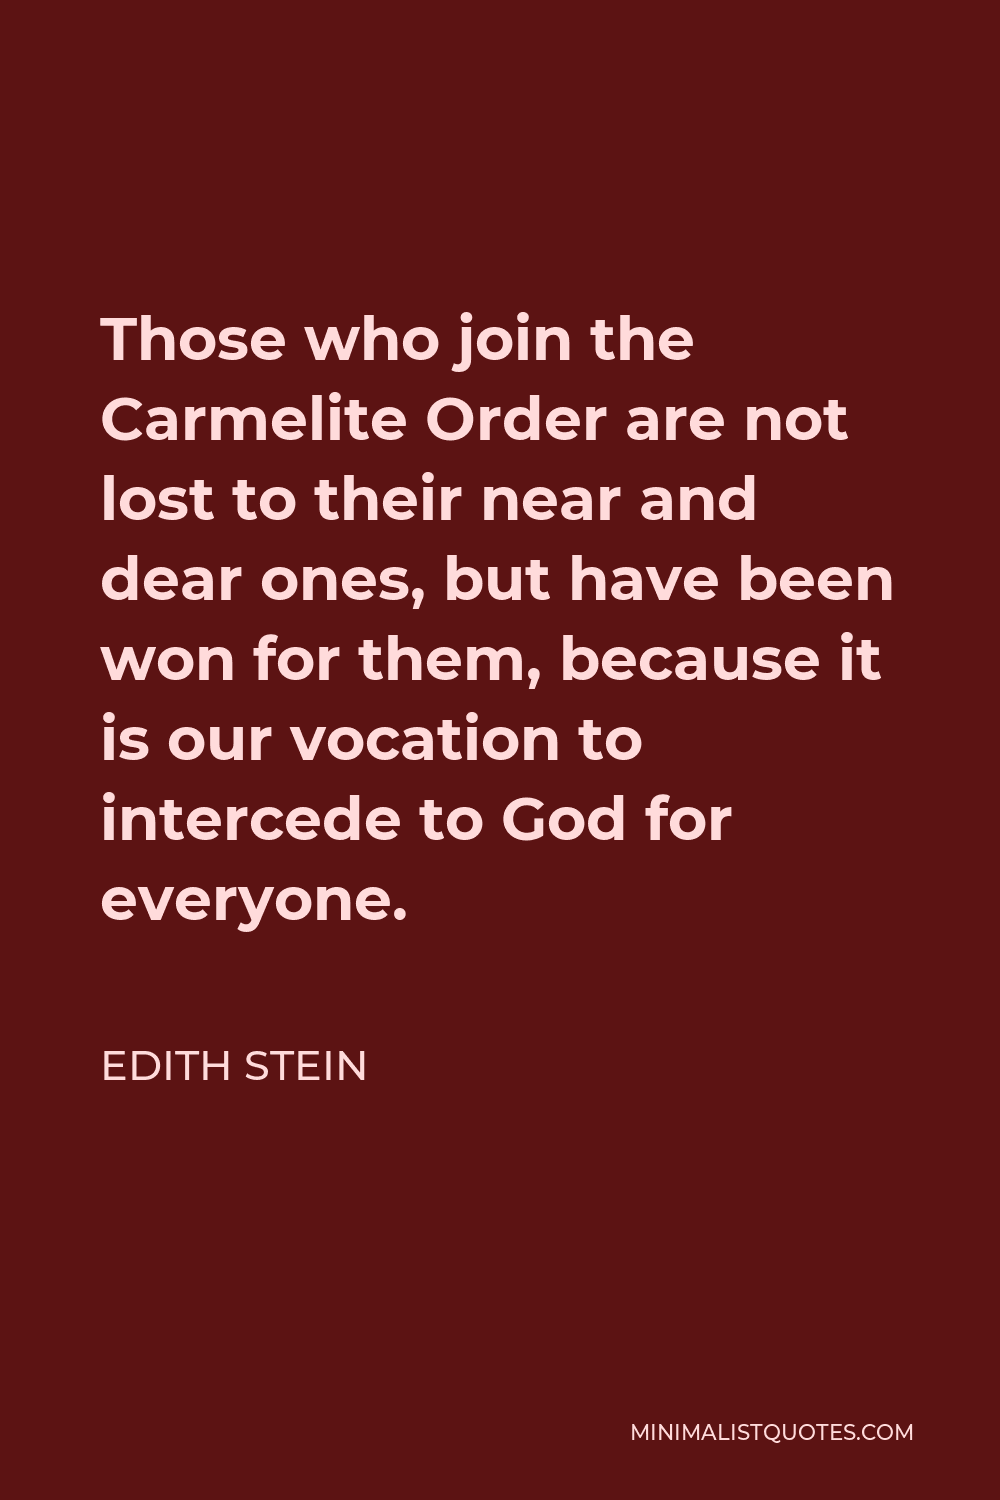 Edith Stein Quote - Those who join the Carmelite Order are not lost to their near and dear ones, but have been won for them, because it is our vocation to intercede to God for everyone.